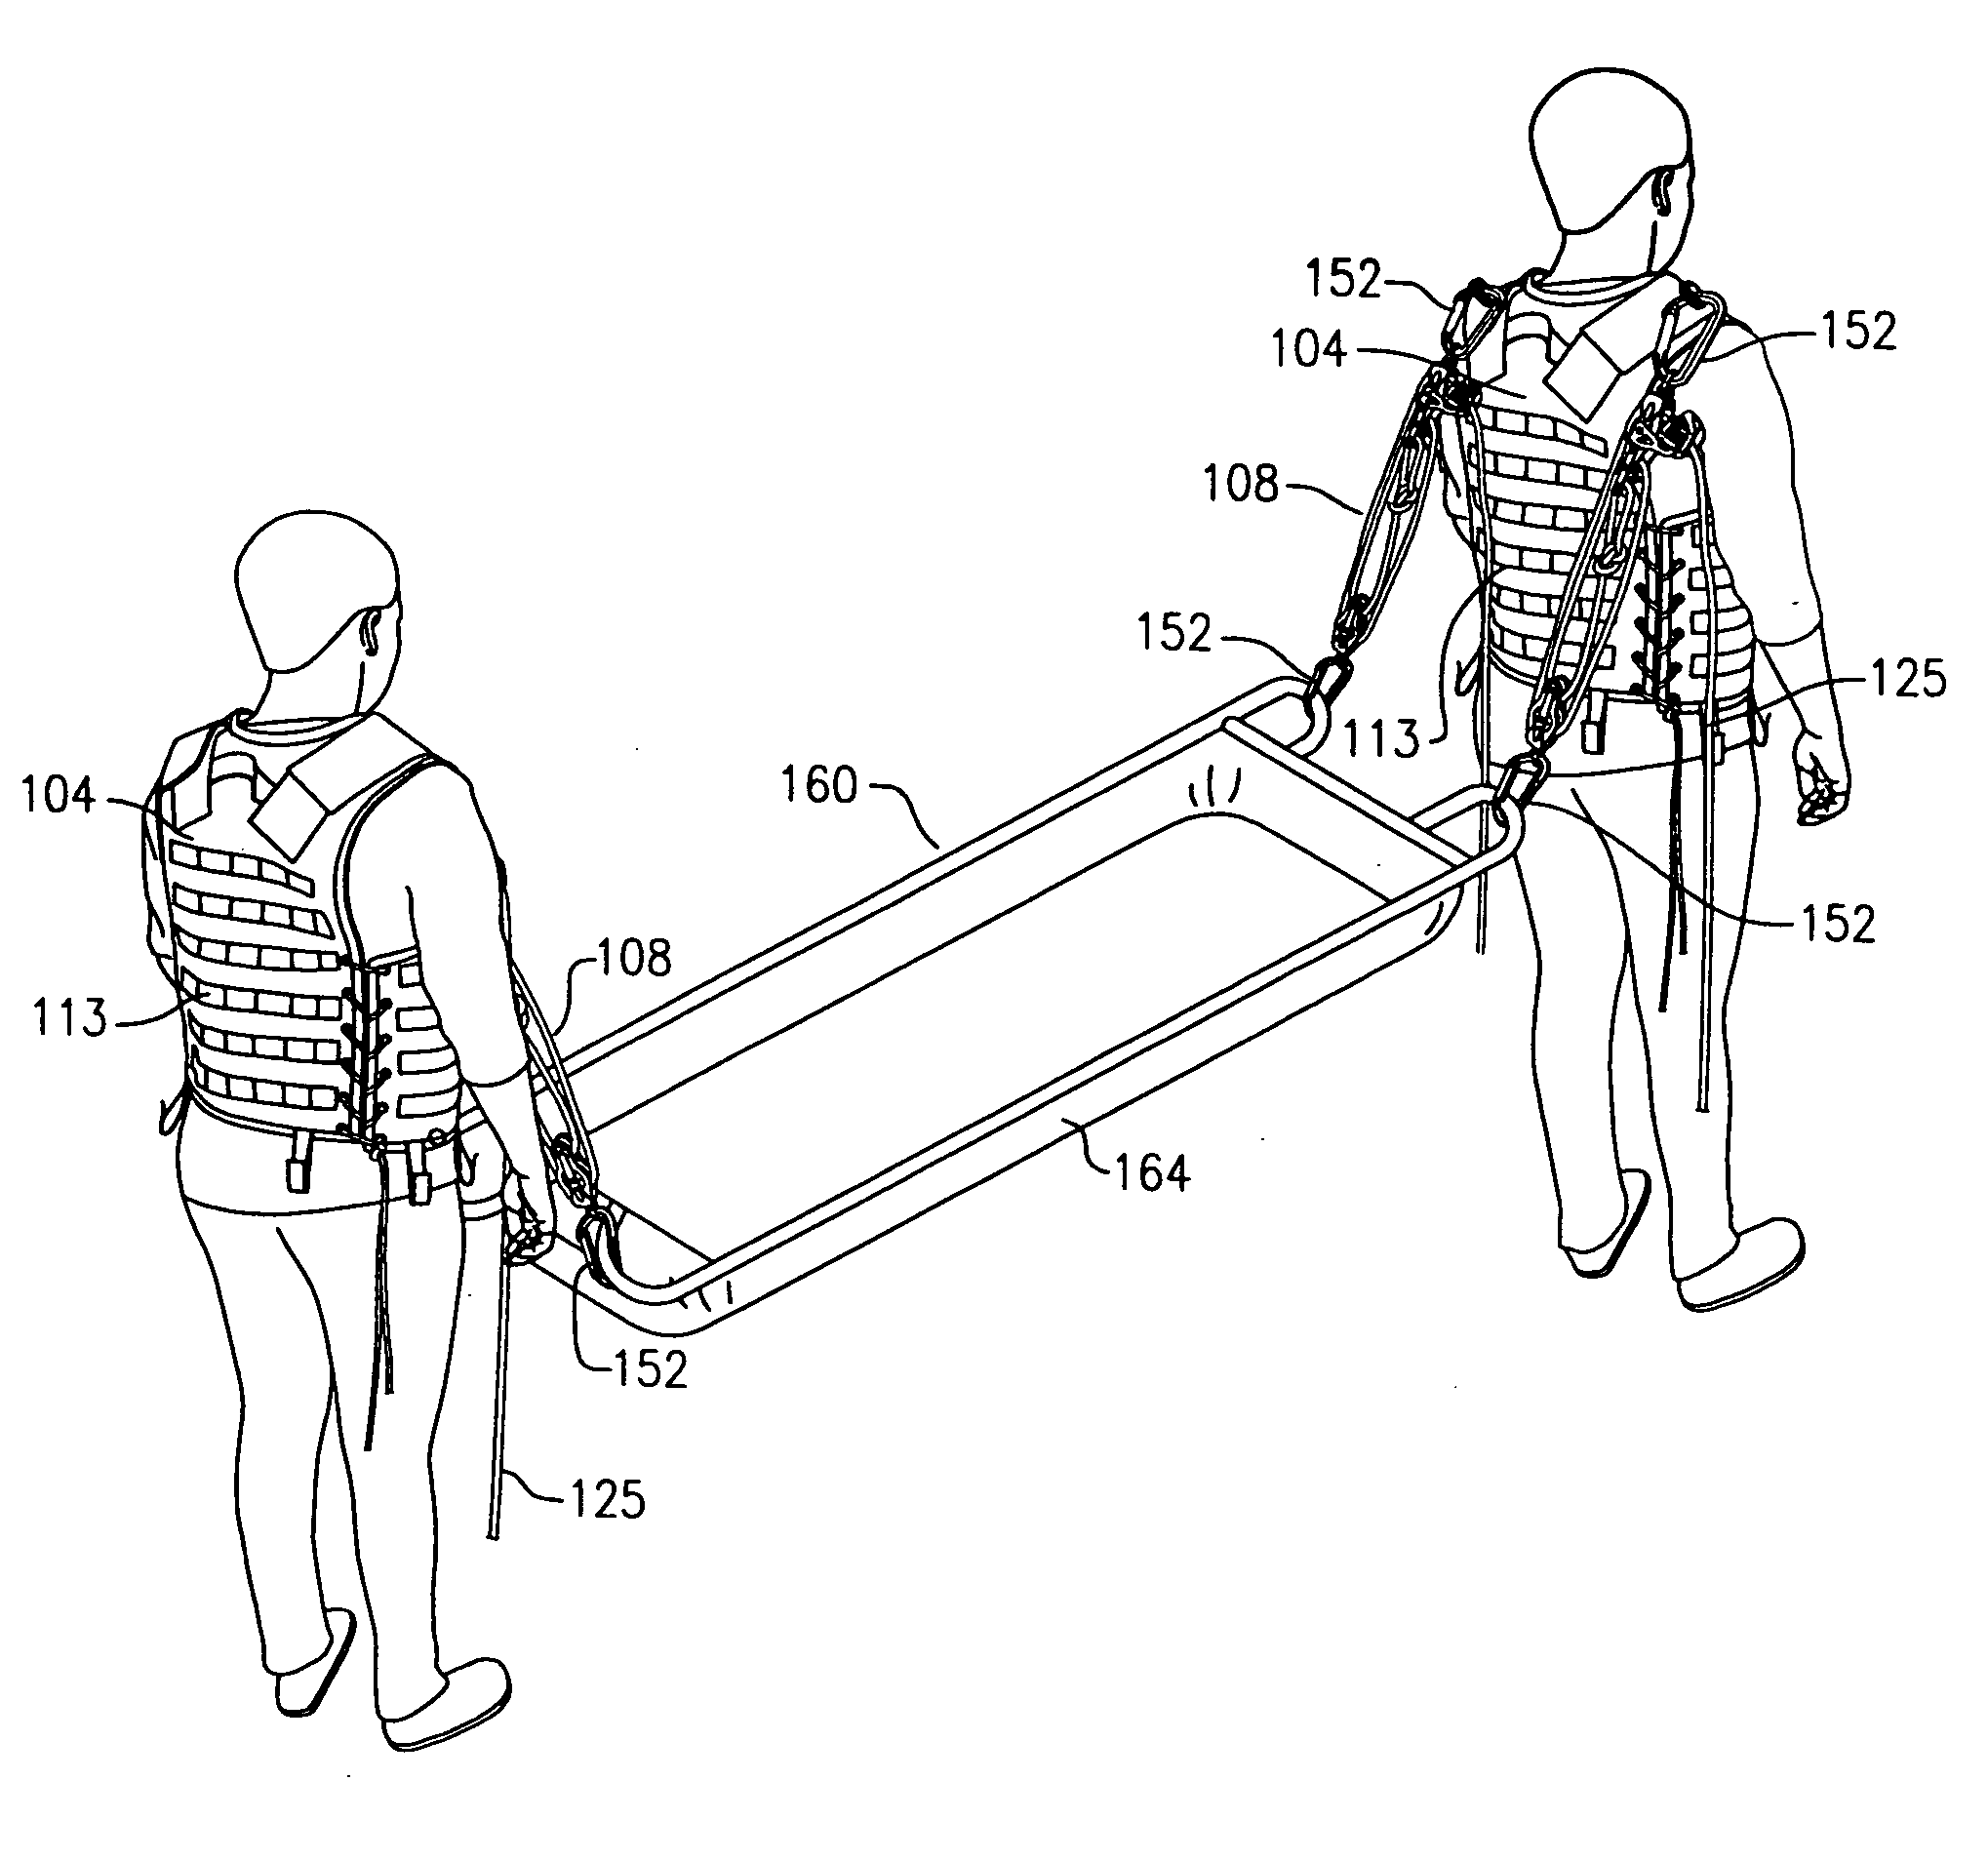 Hands-free lifting and carrying apparatus